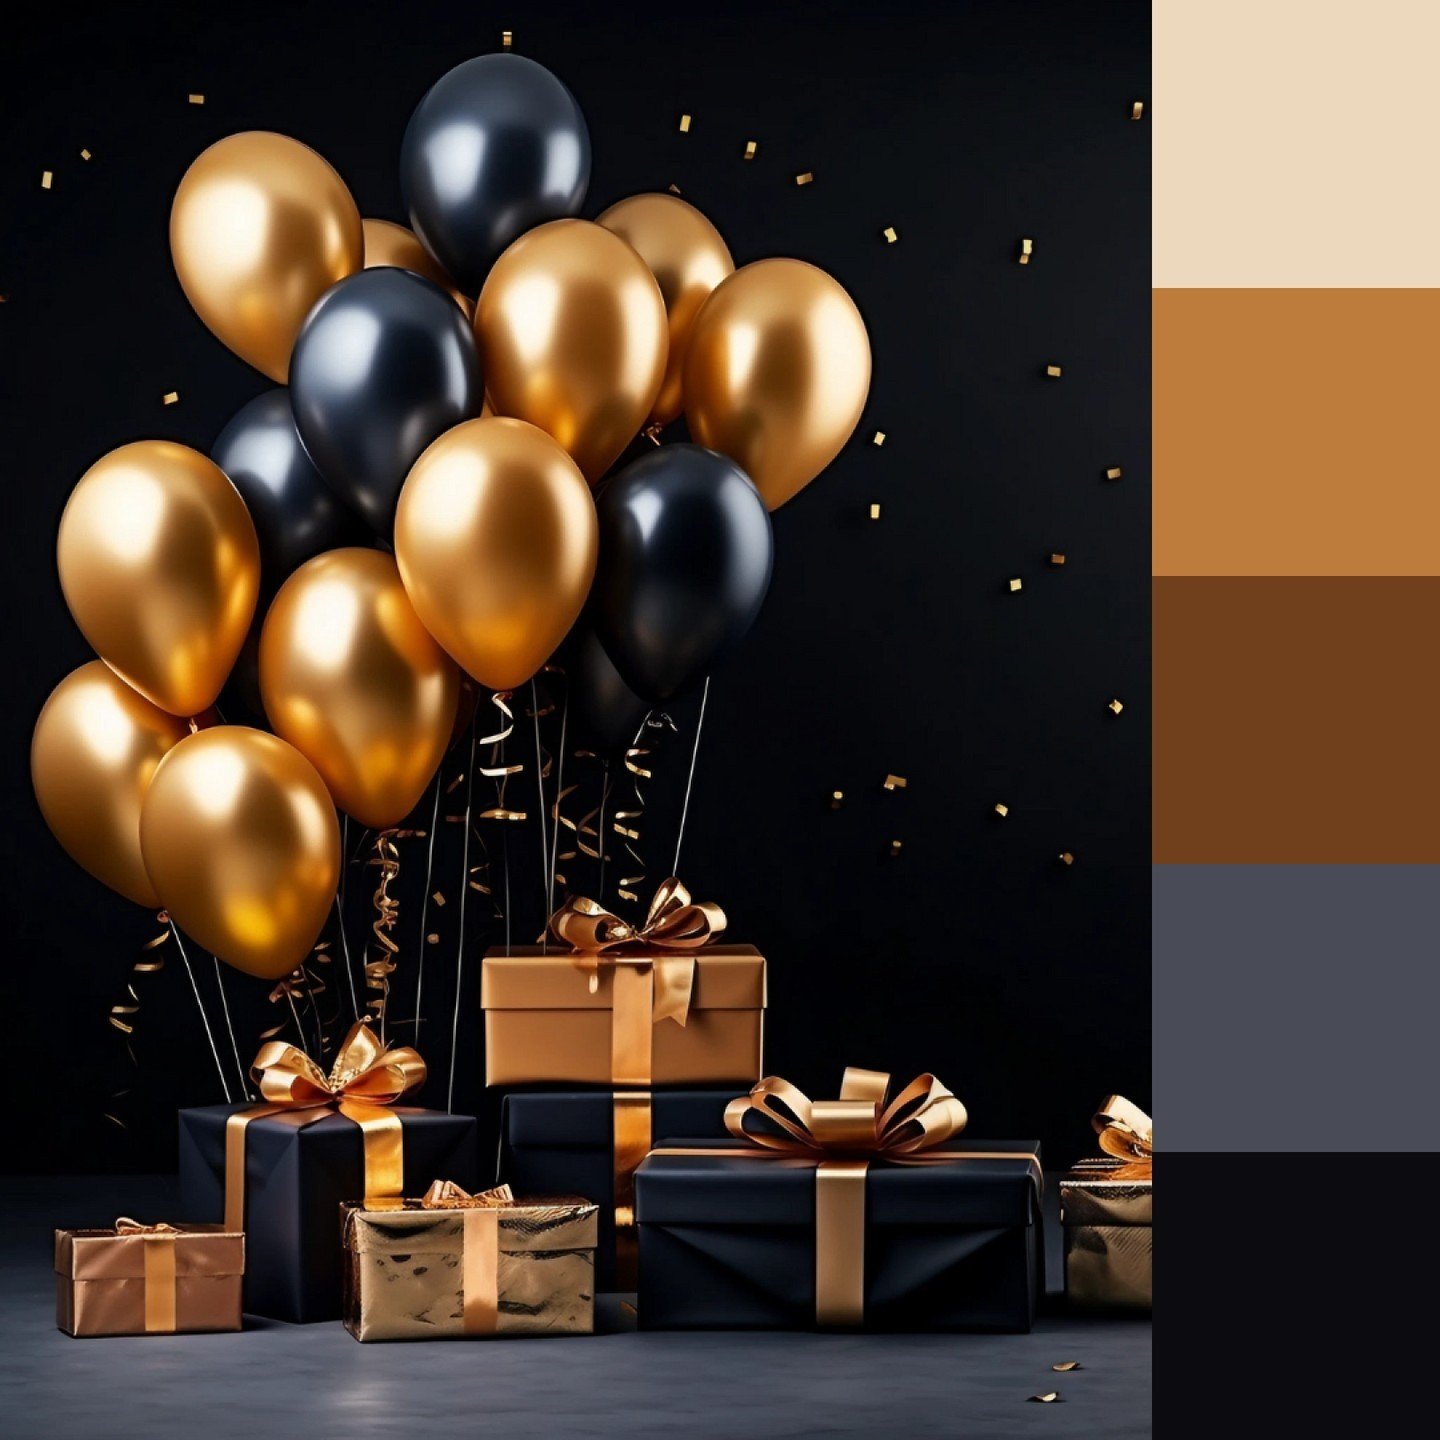 🥳 BIRTHDAY COLOR PALETTE 🥳

I love a moody palette. Today, I'm sharing a color palette for a sophisticated birthday celebration because:

1. My oldest daughter is soon celebrating her big day, which means it's a celebration for me of becoming a mot